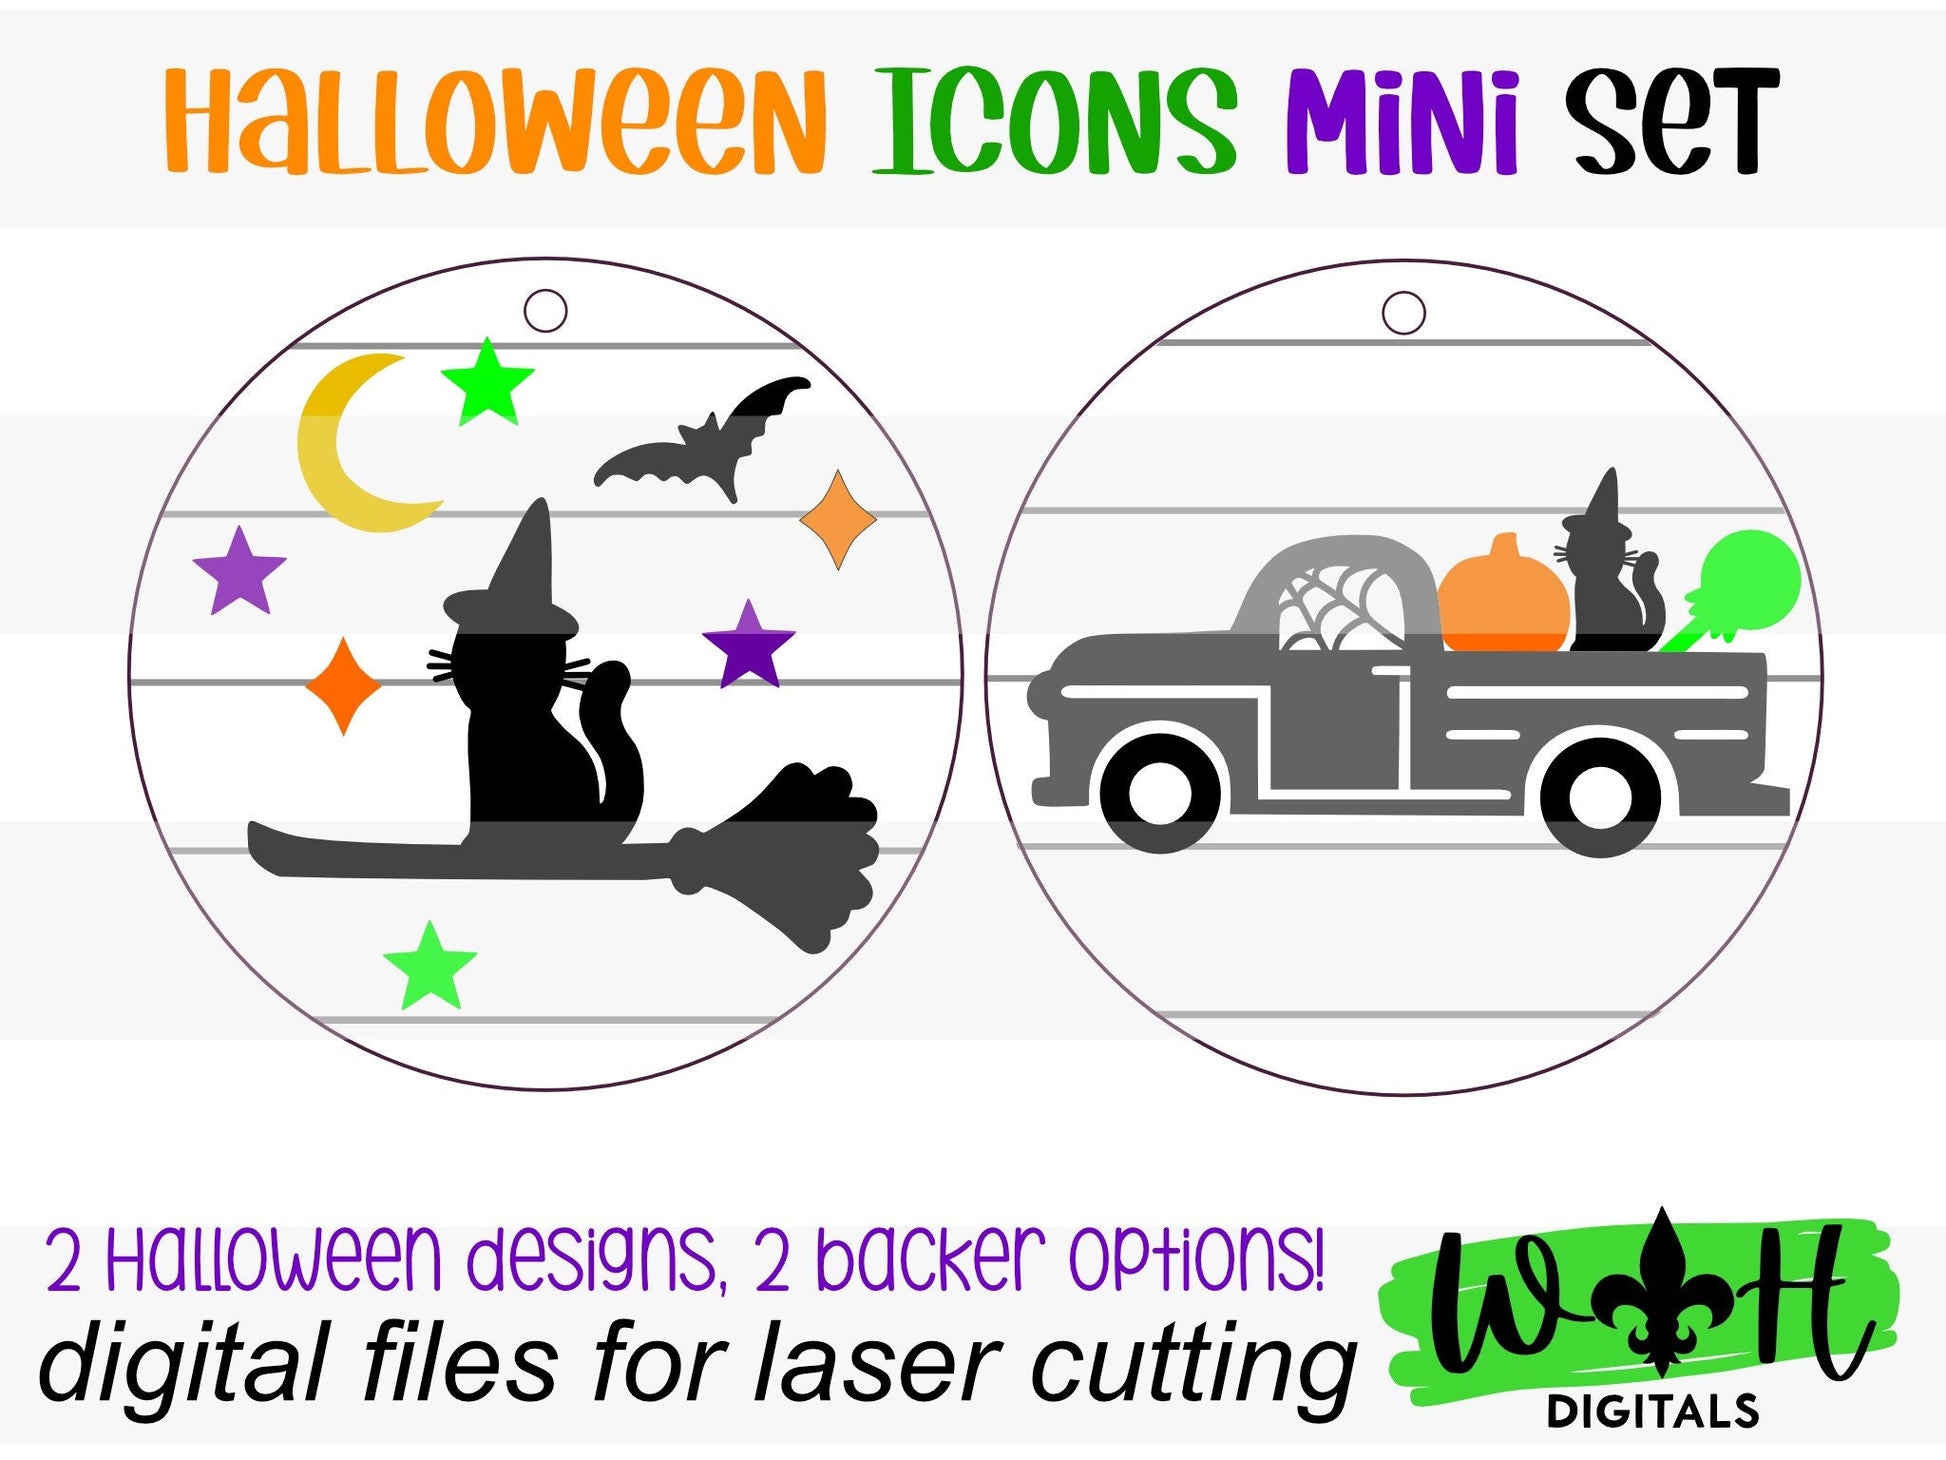 Halloween Icons Vintage Truck and Witch Cat Mini Set - Spooky Handdrawn DIY Doodle Ornaments - Cut File For Glowforge - Digital SVG File